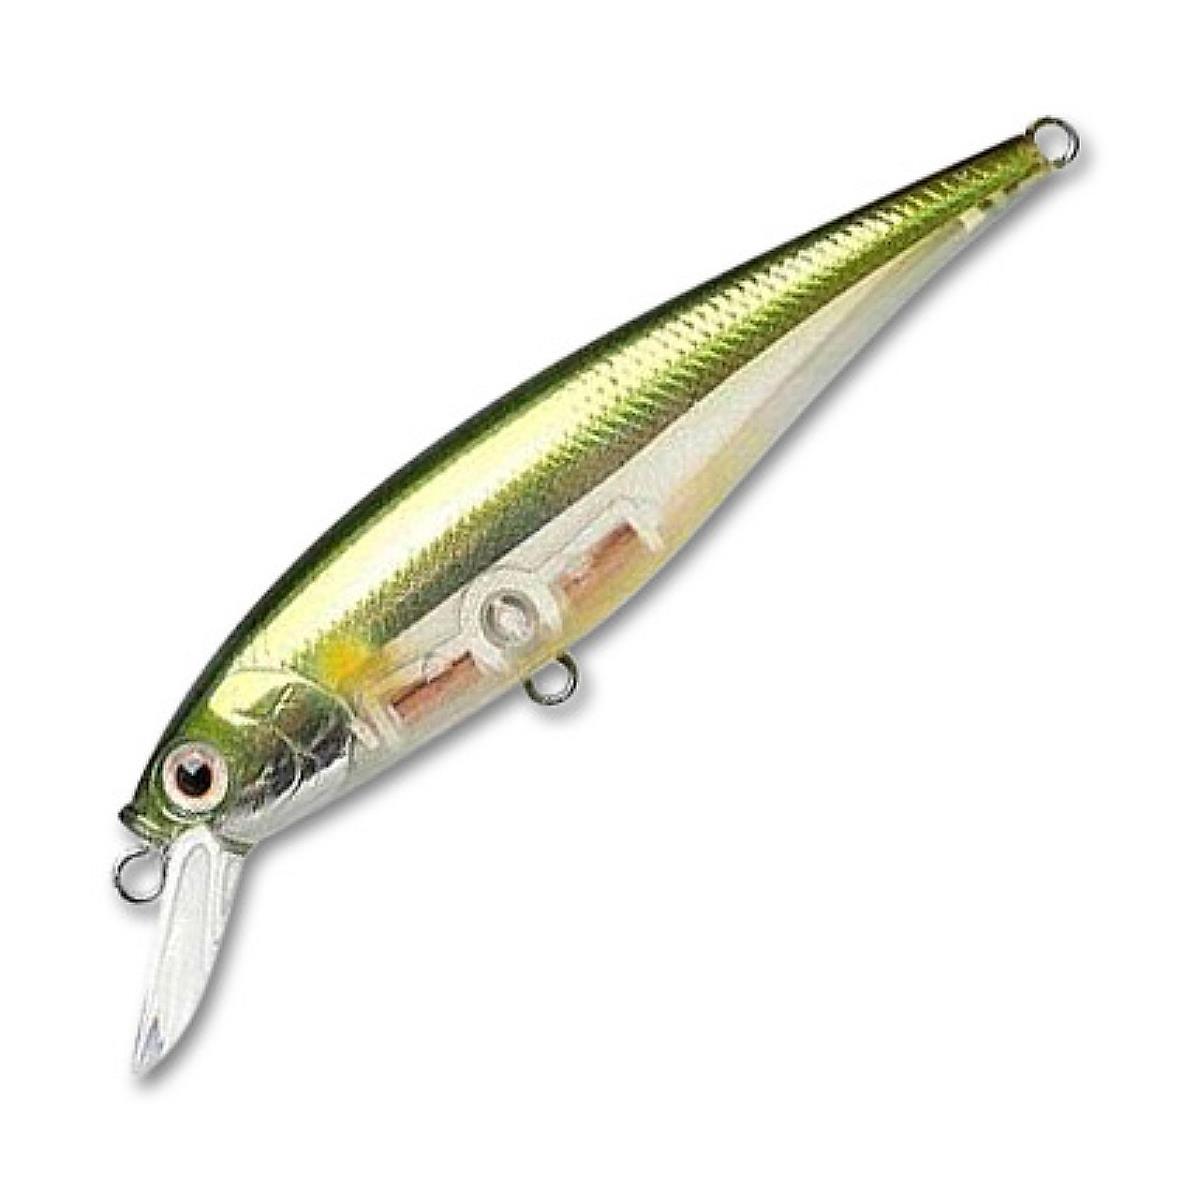 воблер pointer 78dd 250 chartreuse shad lucky craft Воблер Pointer 78-372 Half Metallic Ayu Lucky Craft